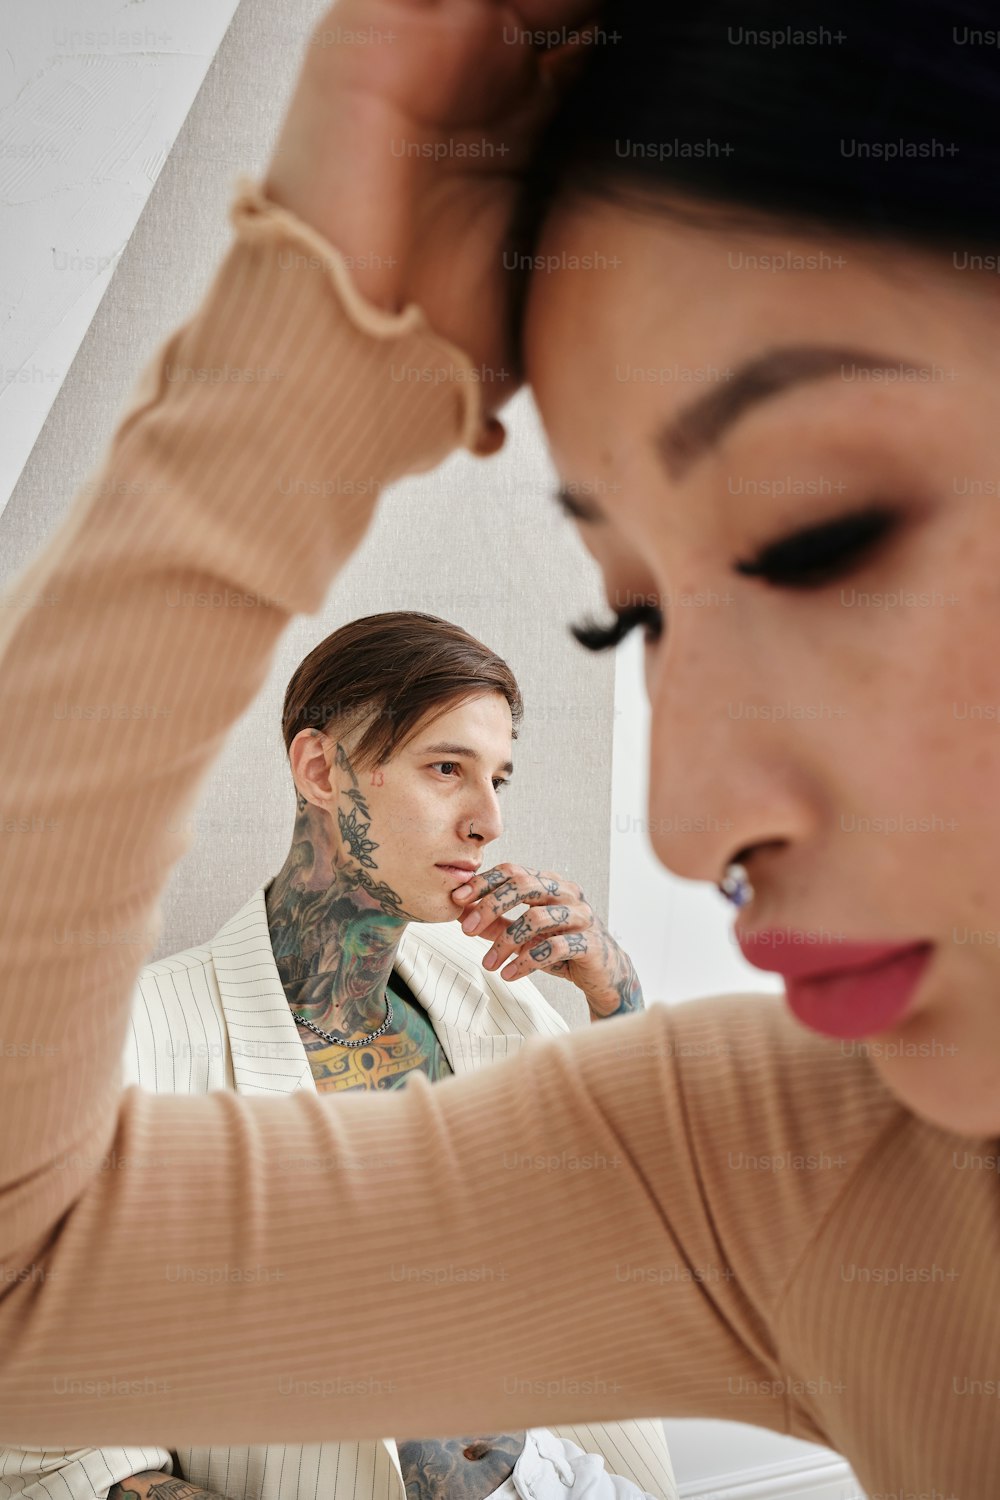 a woman looking at her reflection in a mirror